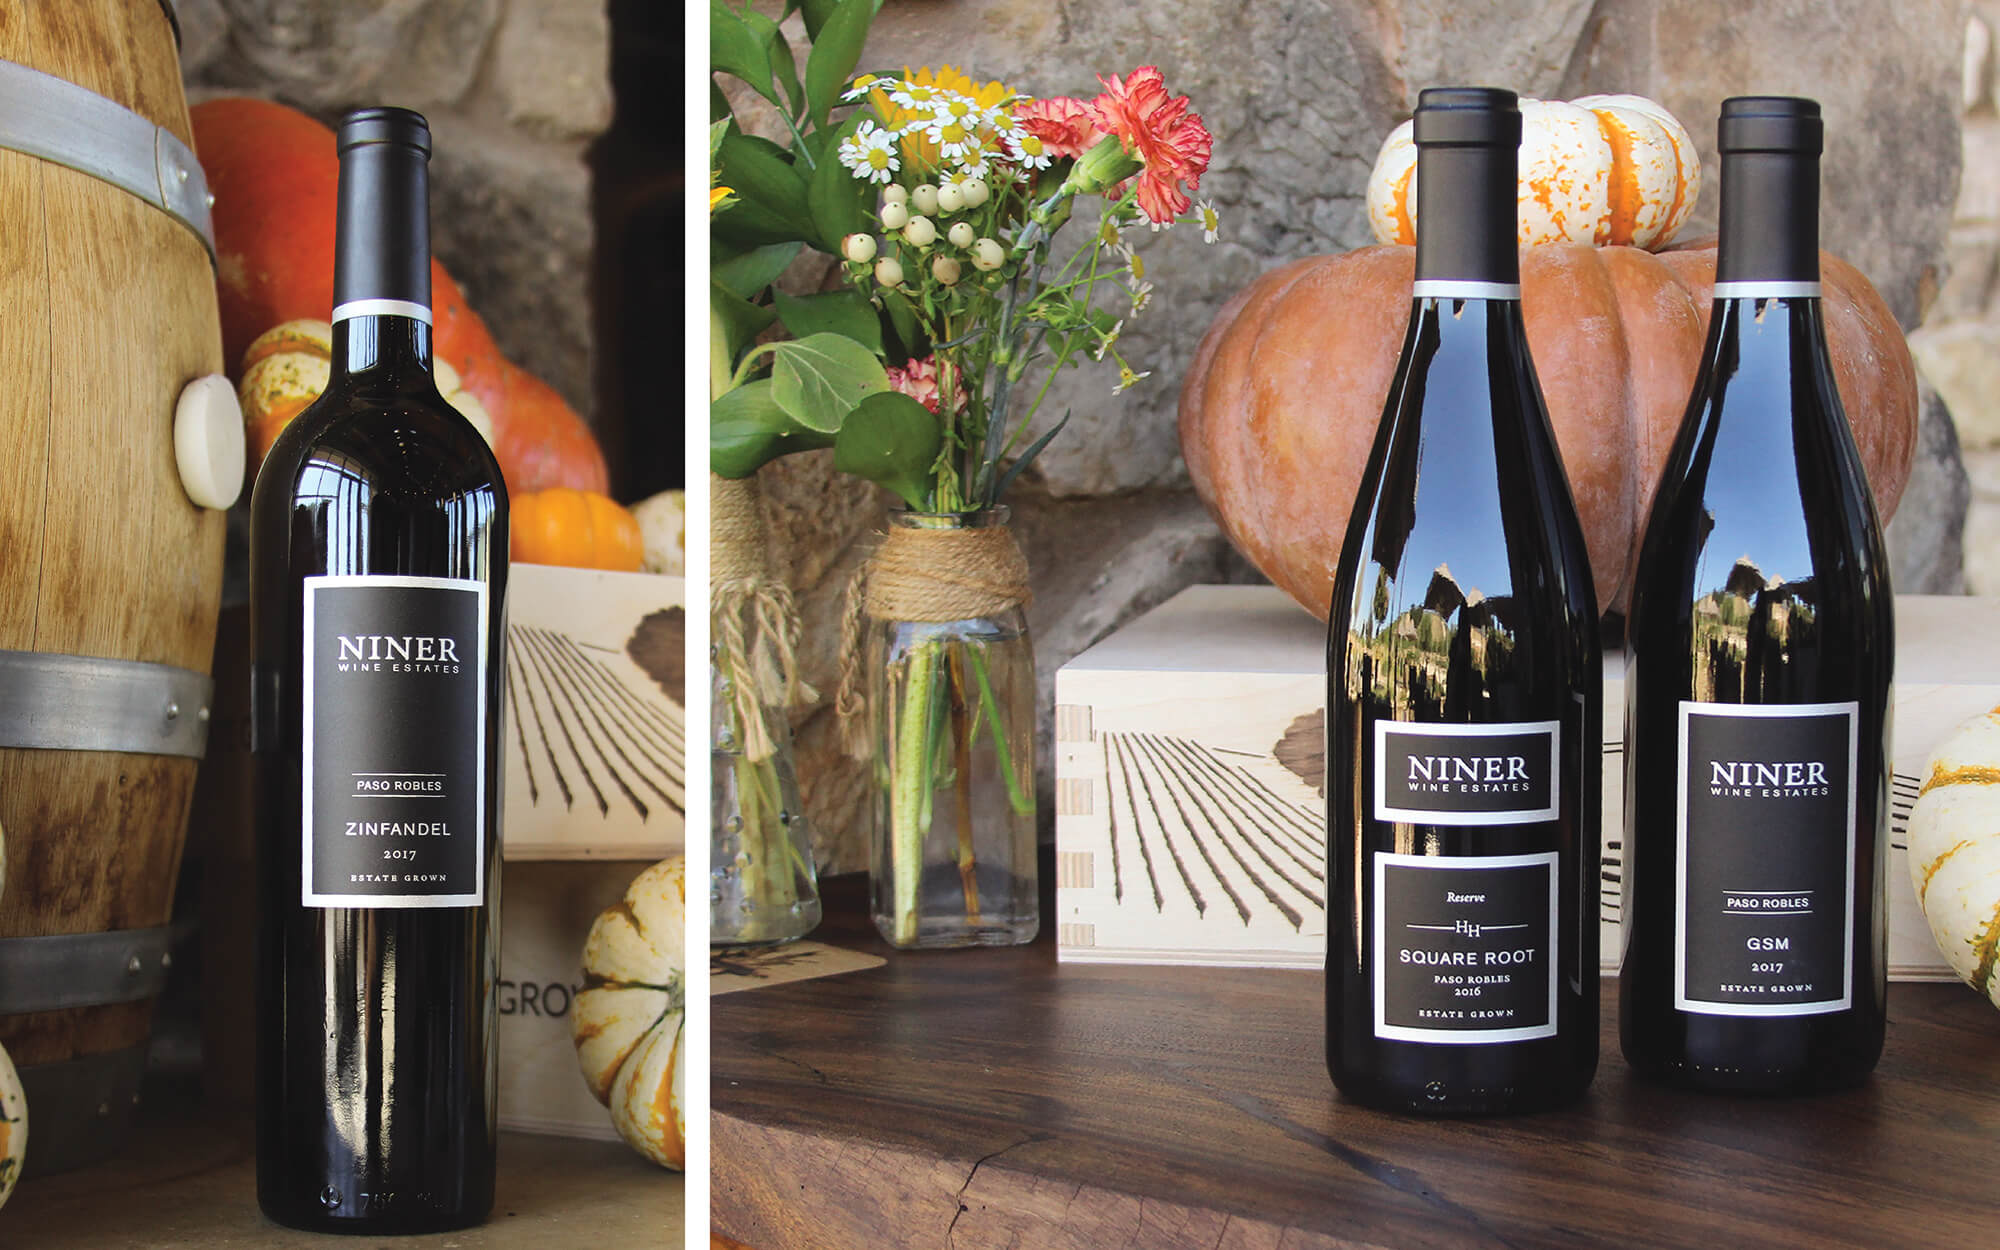 Zinfandel, Square Root and GSM bottles with fall decor in the background